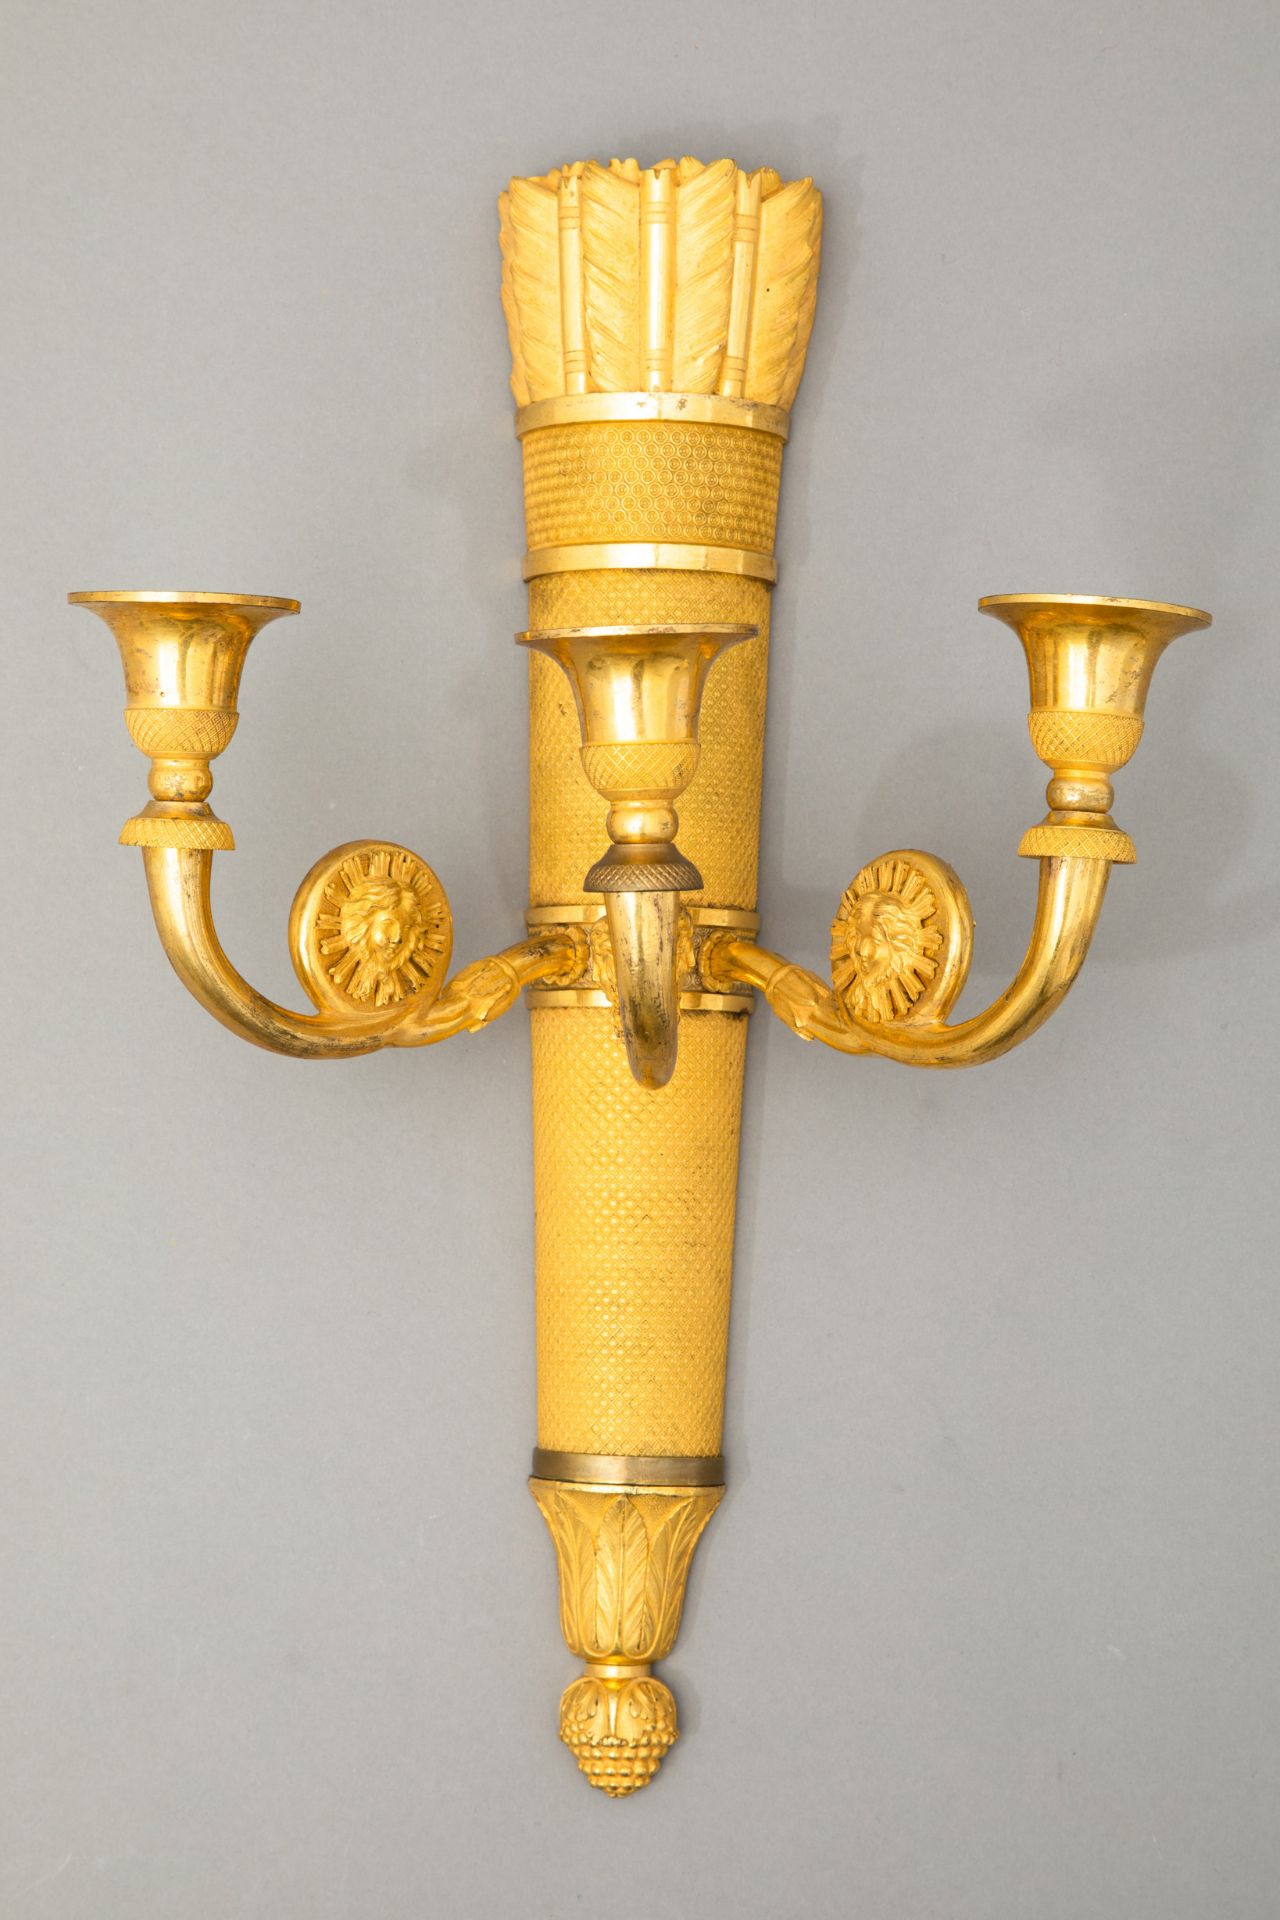 Louis Seize wall sconce, fire-gilded bronze - Image 2 of 4